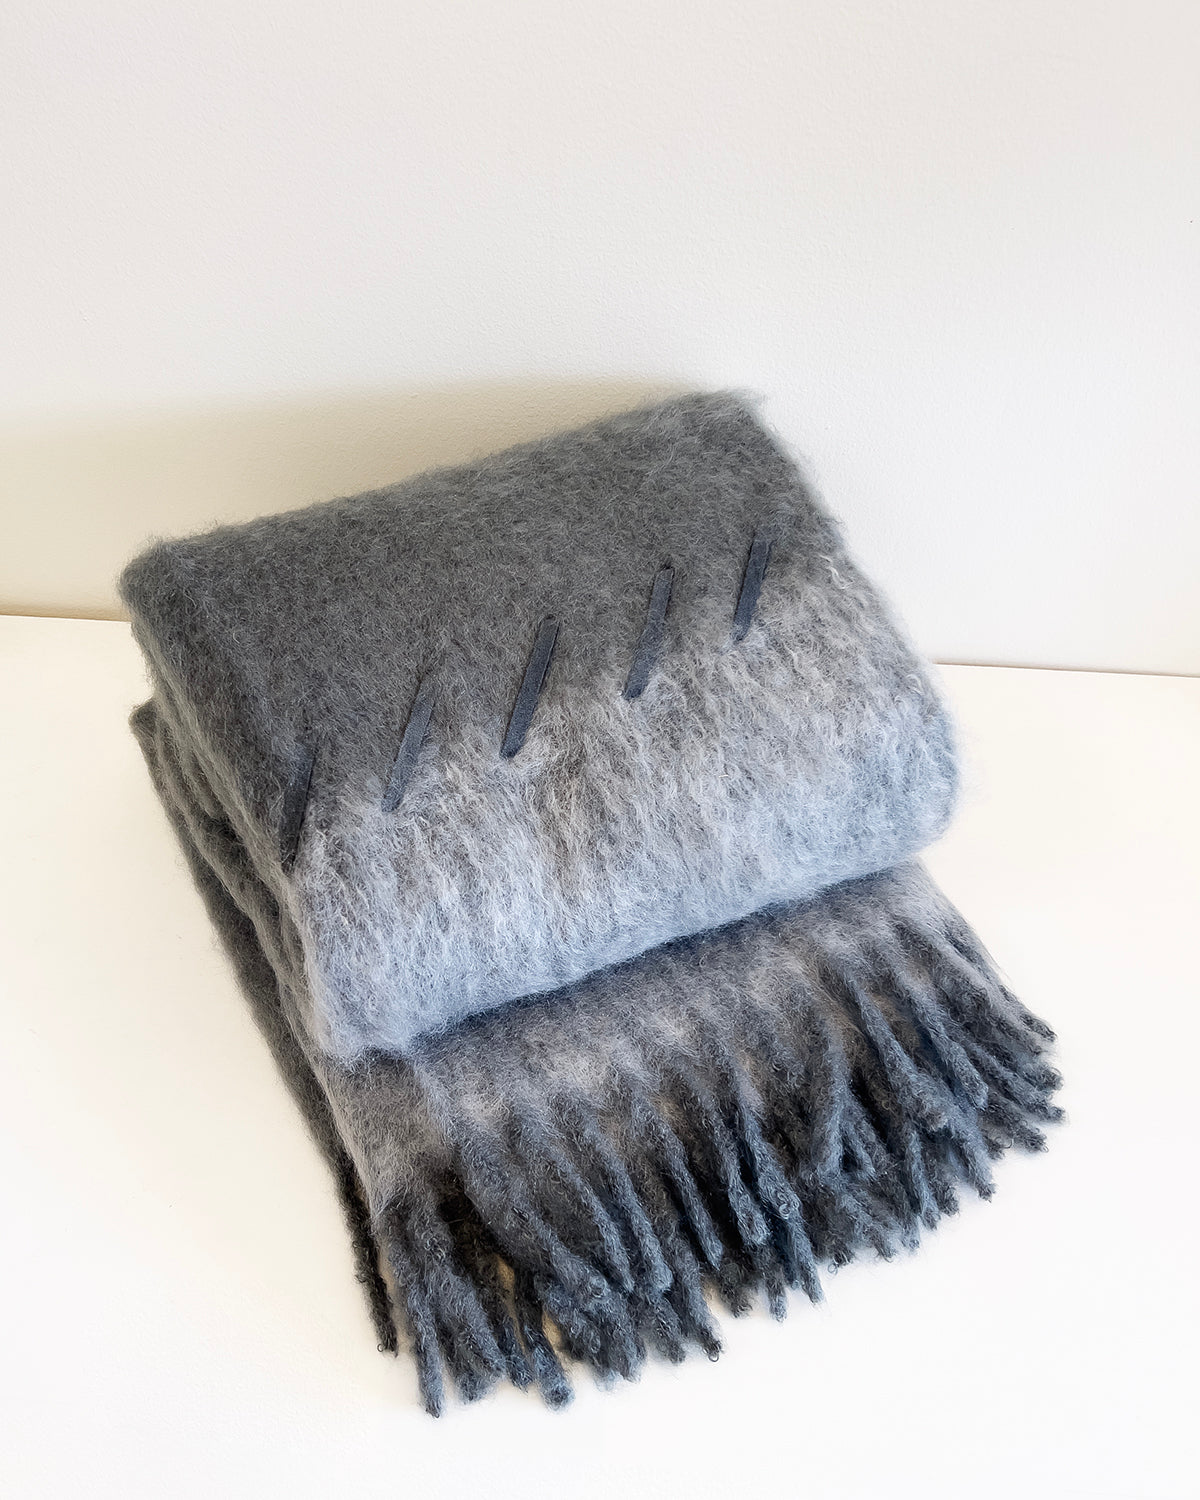 Steam and Smoke Mohair Blanket - Suede Whipstitch